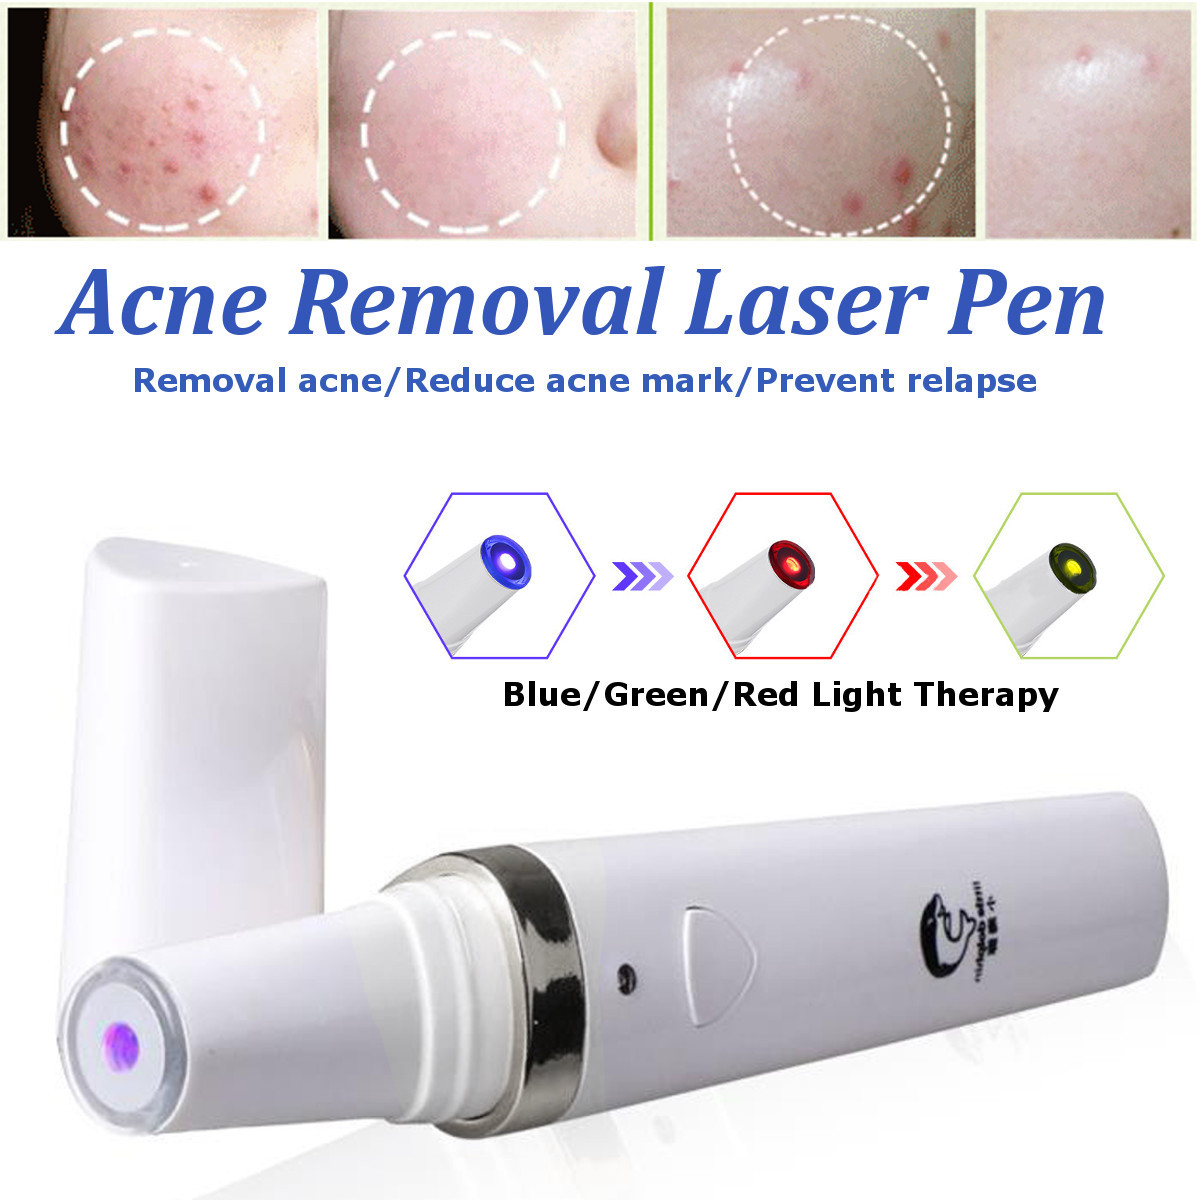 Blue-Red-Green-Light-Therapy-Acne-Laser-Pen-Soft-Scar-Removal-Treatment-Device-Beauty-Machine-1368410-4